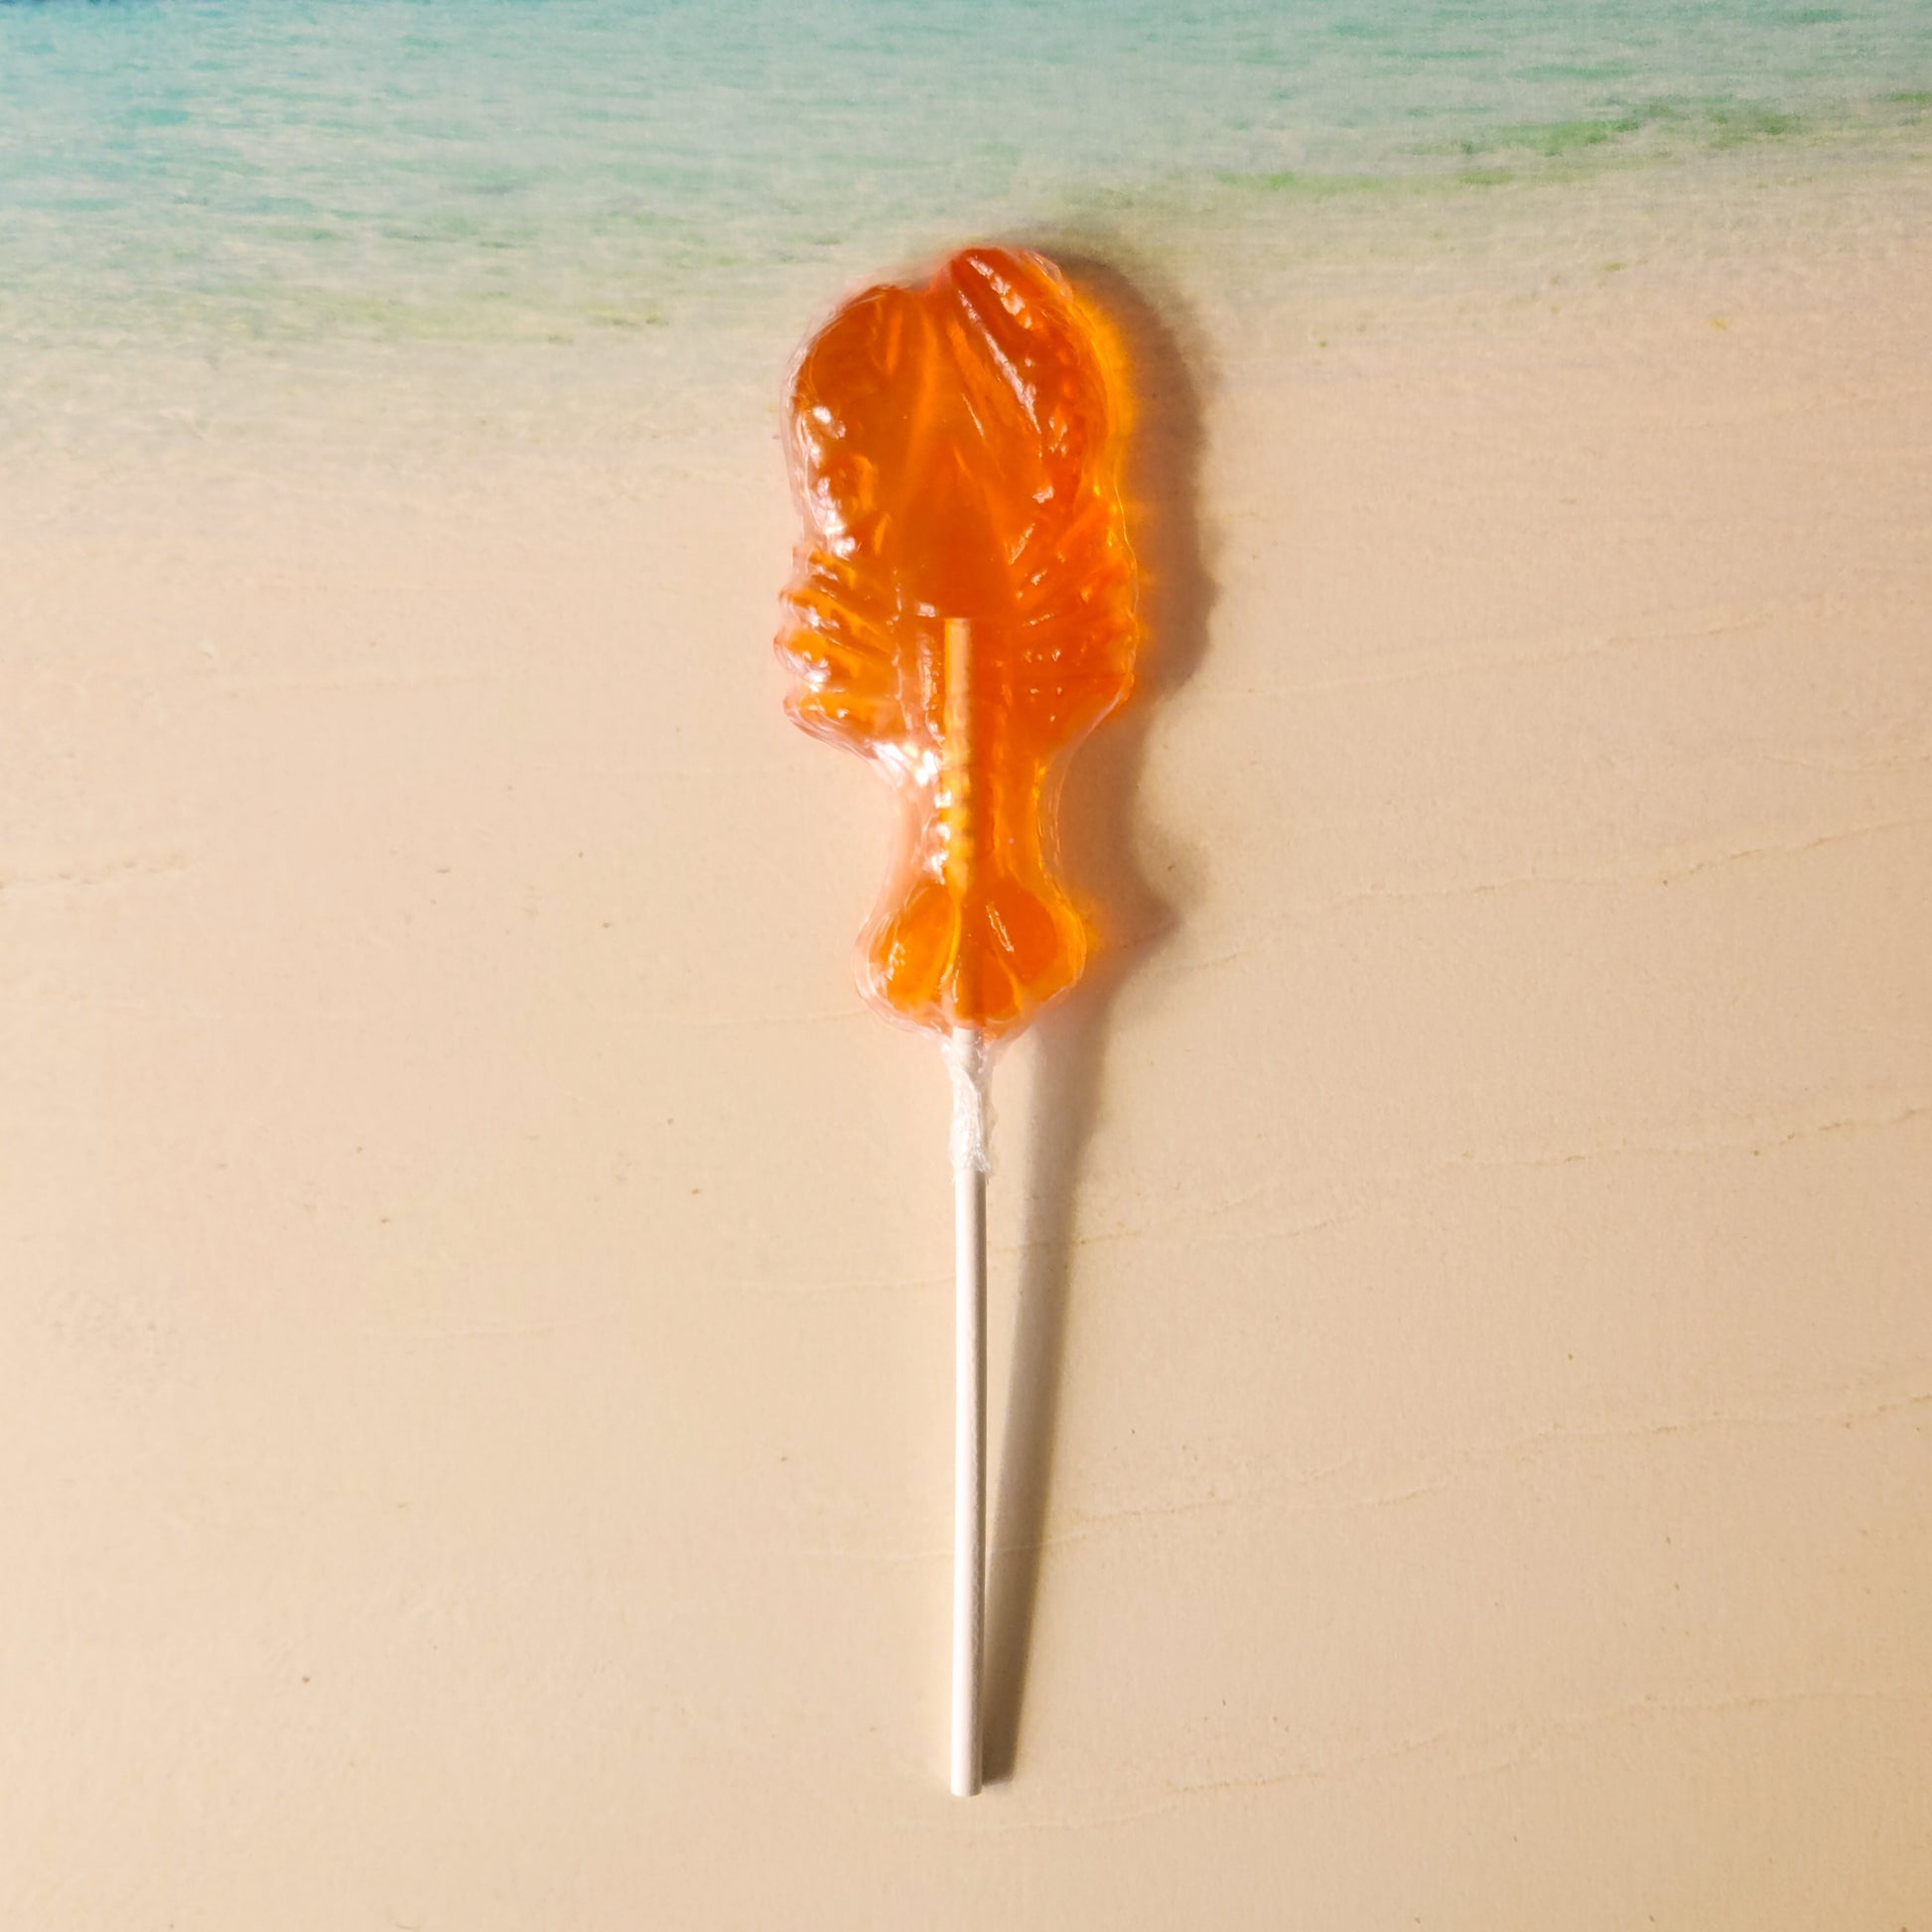 bright citrus orange flavor gives this lobster hard candy pop some zing!